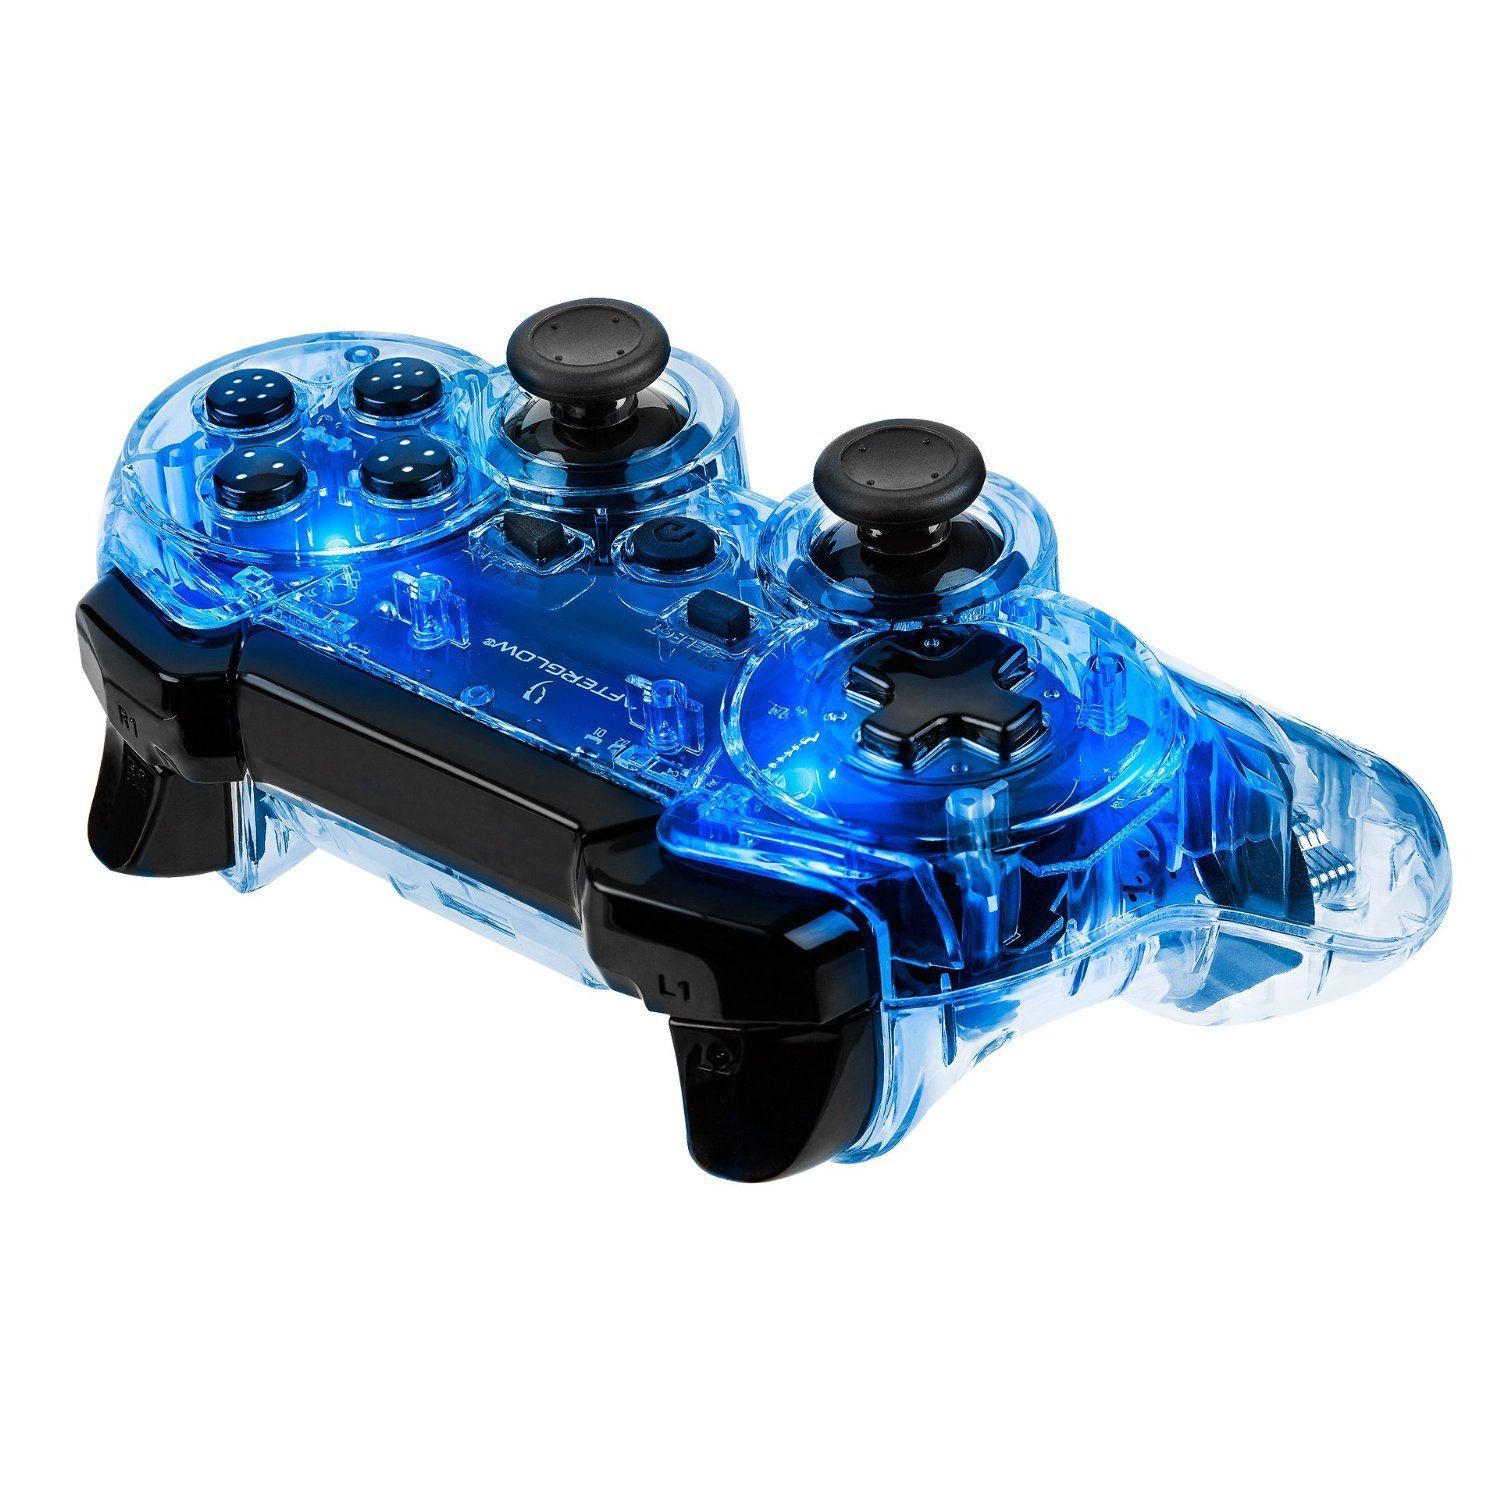 ps3 afterglow controller